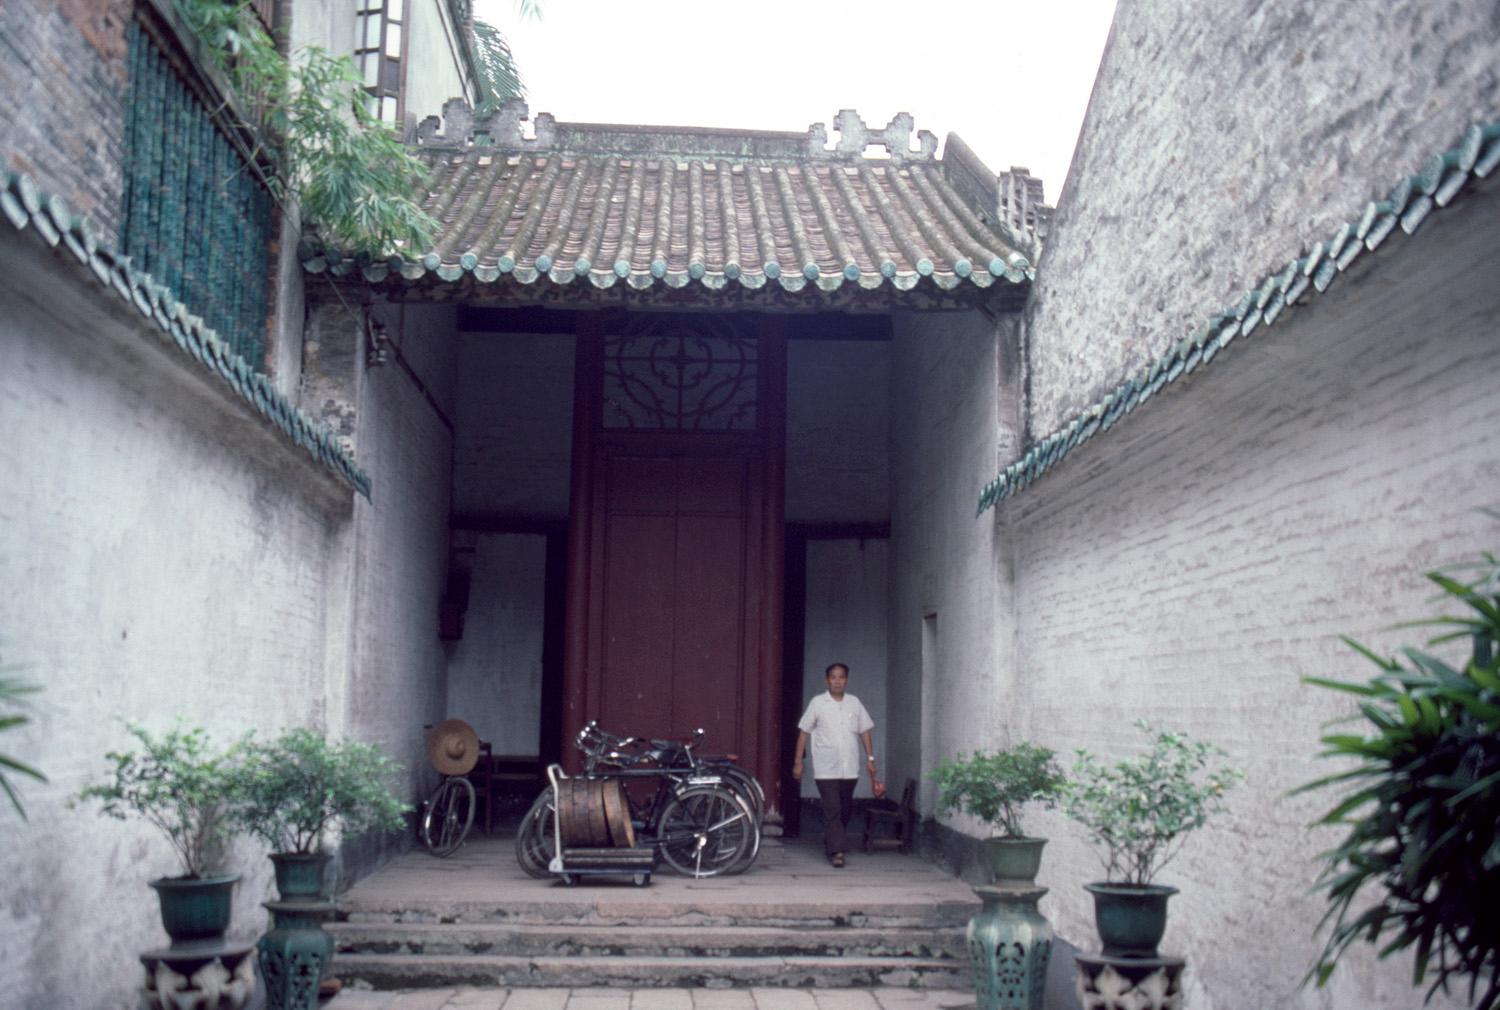 View of narrow courtyard at the southern entrance, looking towards the street